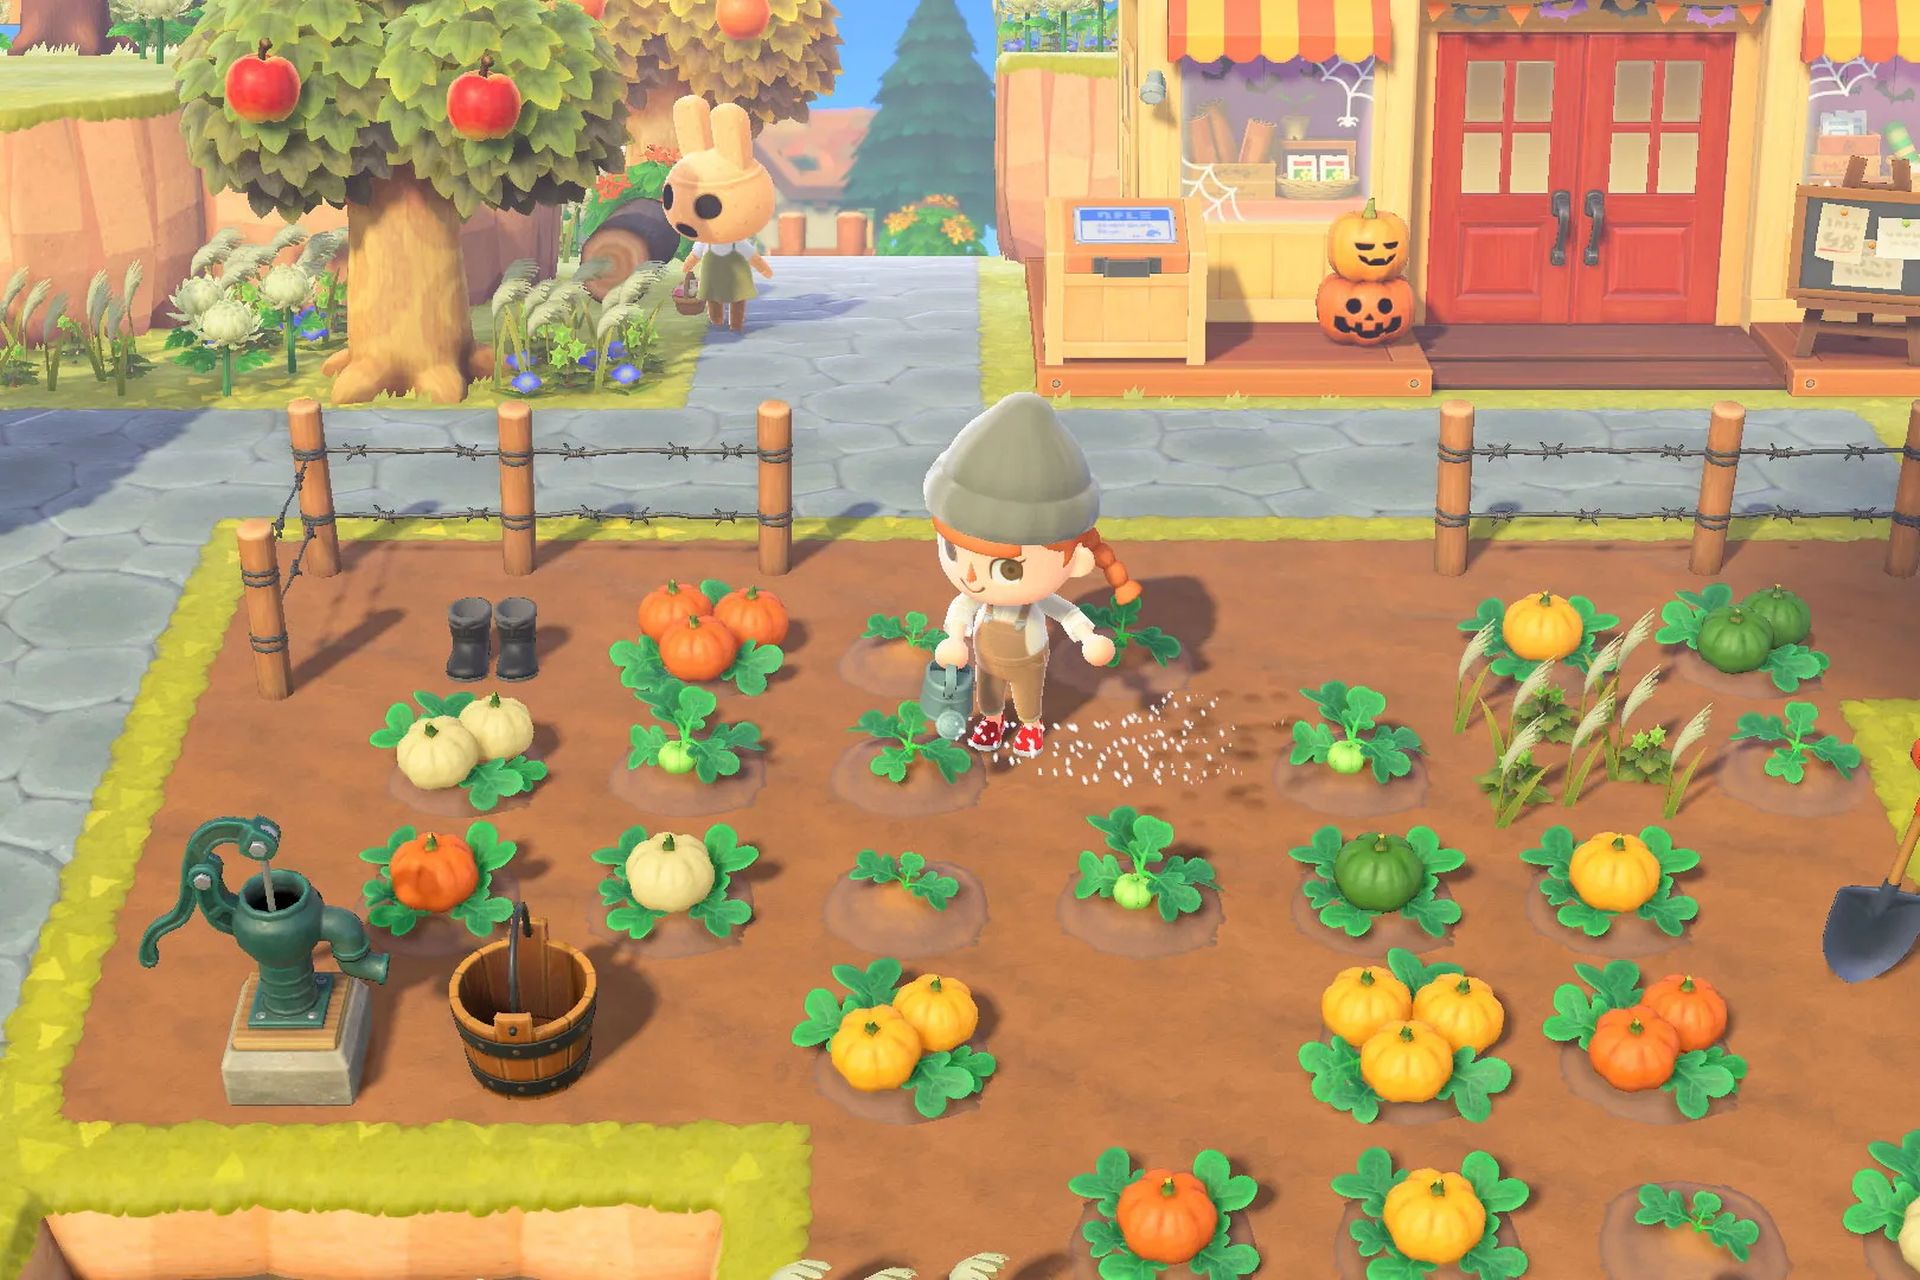 In this article, we are going to be covering how to get Ladder in Animal Crossing: New Horizons, so you can access areas in the game that are out of reach.